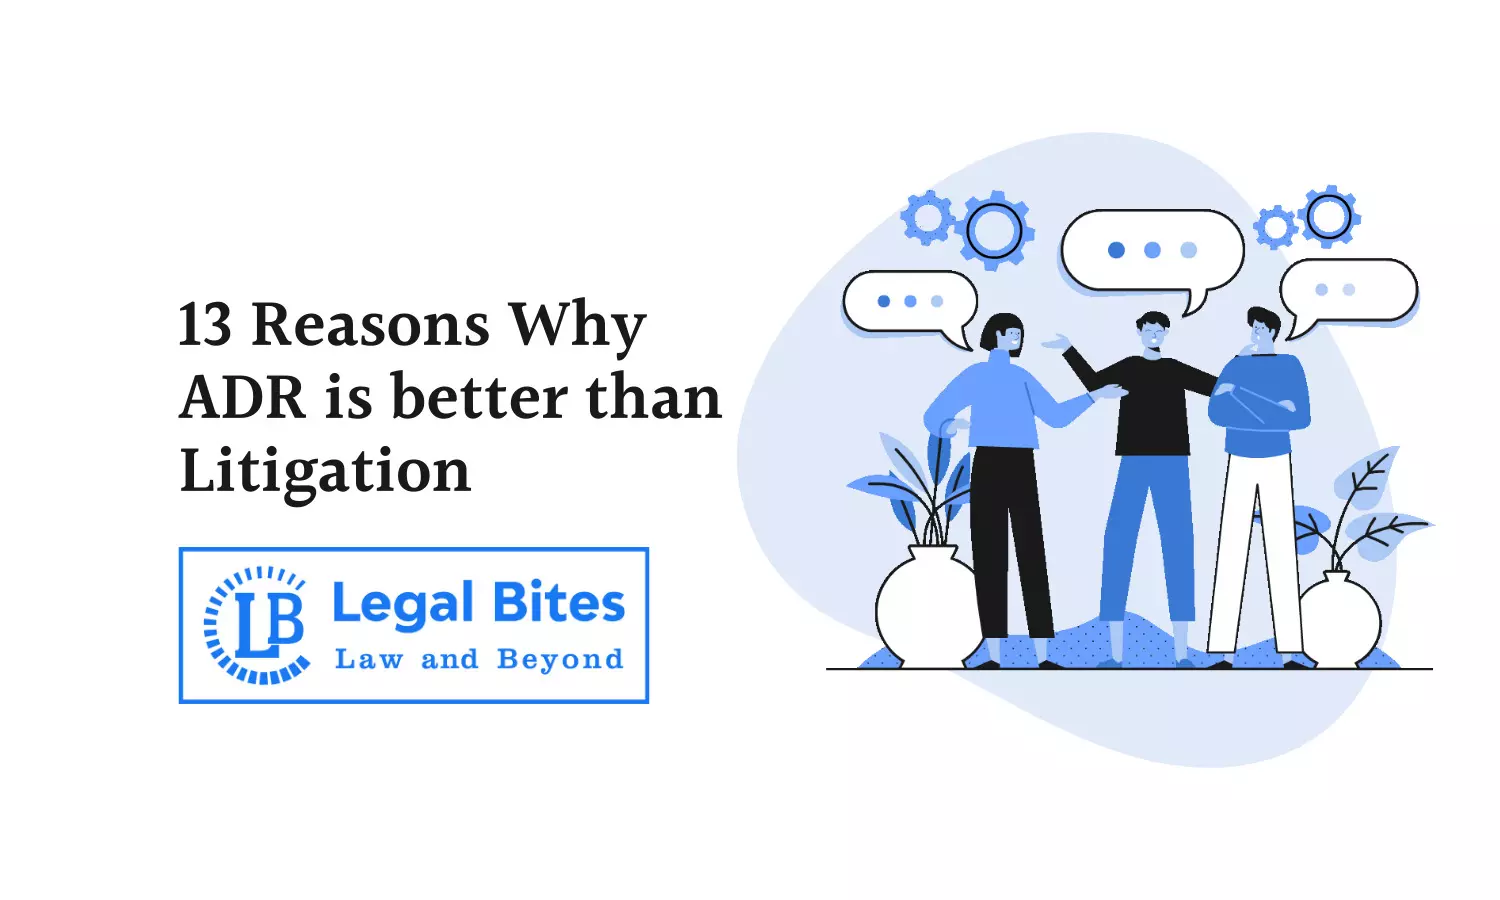 13 Reasons Why ADR is better than Litigation